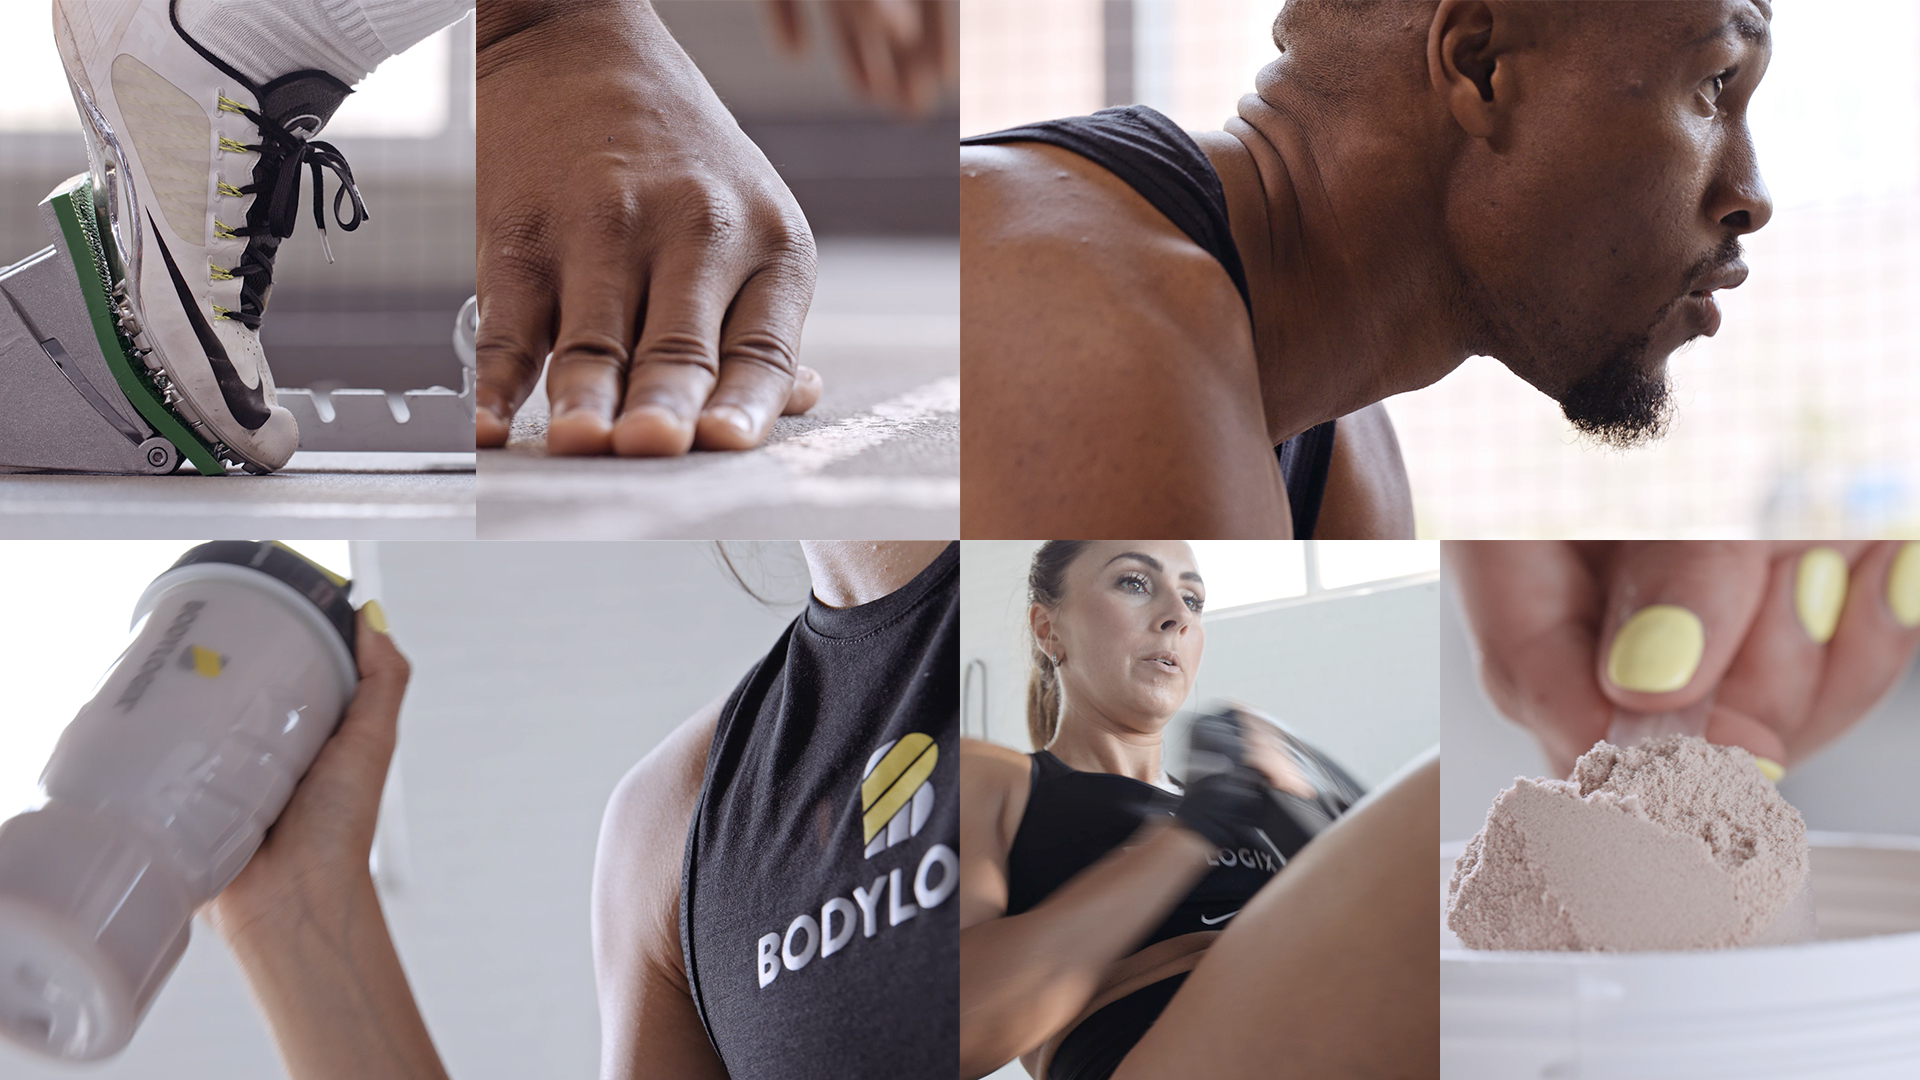 A collage of images featuring a woman shaking a protein drink, a man at a starting line, woman scooping protein powder, and a woman exercising with weights.